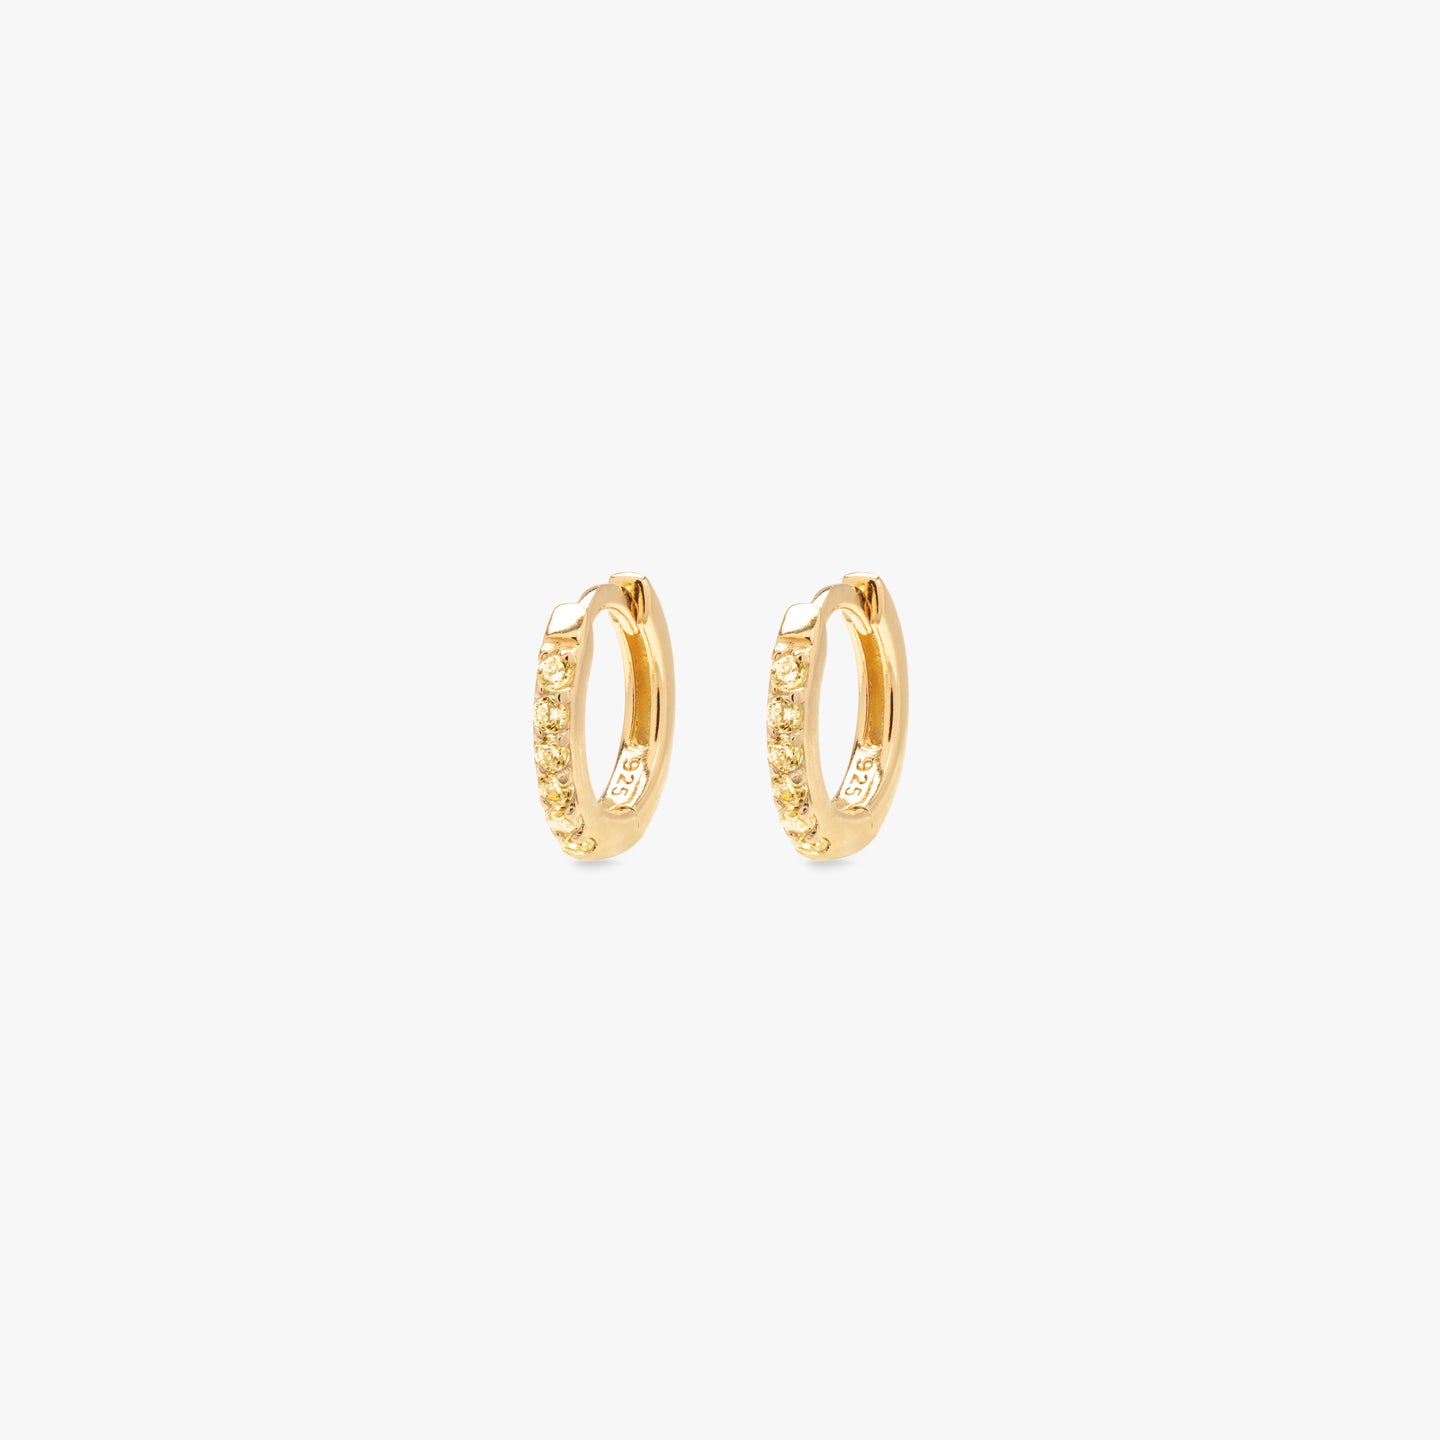 Miniature pavé huggie in gold with yellow gems. [pair] color:gold/yellow